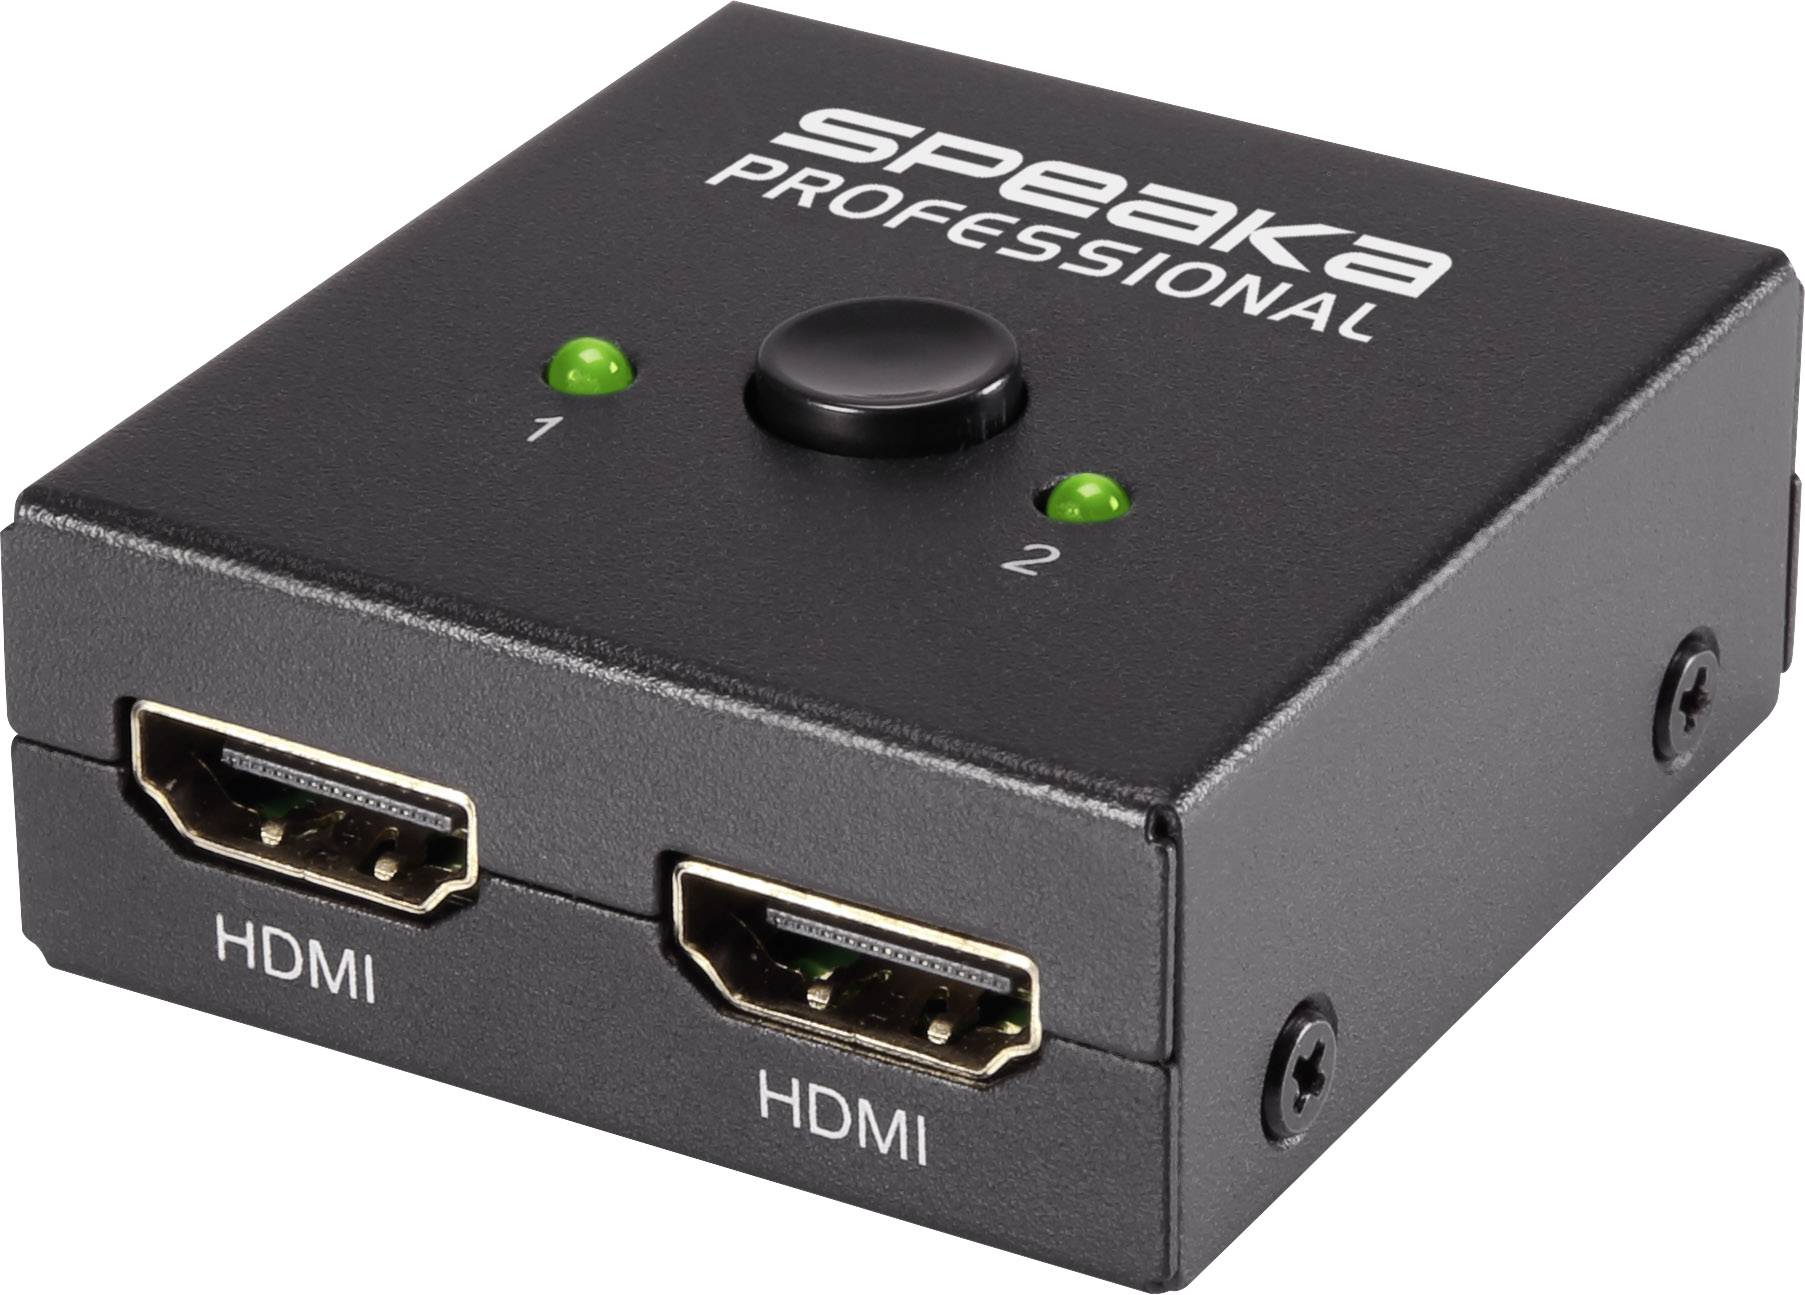 personificering ler Absorbere SpeaKa Professional SP-7141056 2 ports HDMI switch bidirectional operation  3840 x 2160 p | Conrad.com